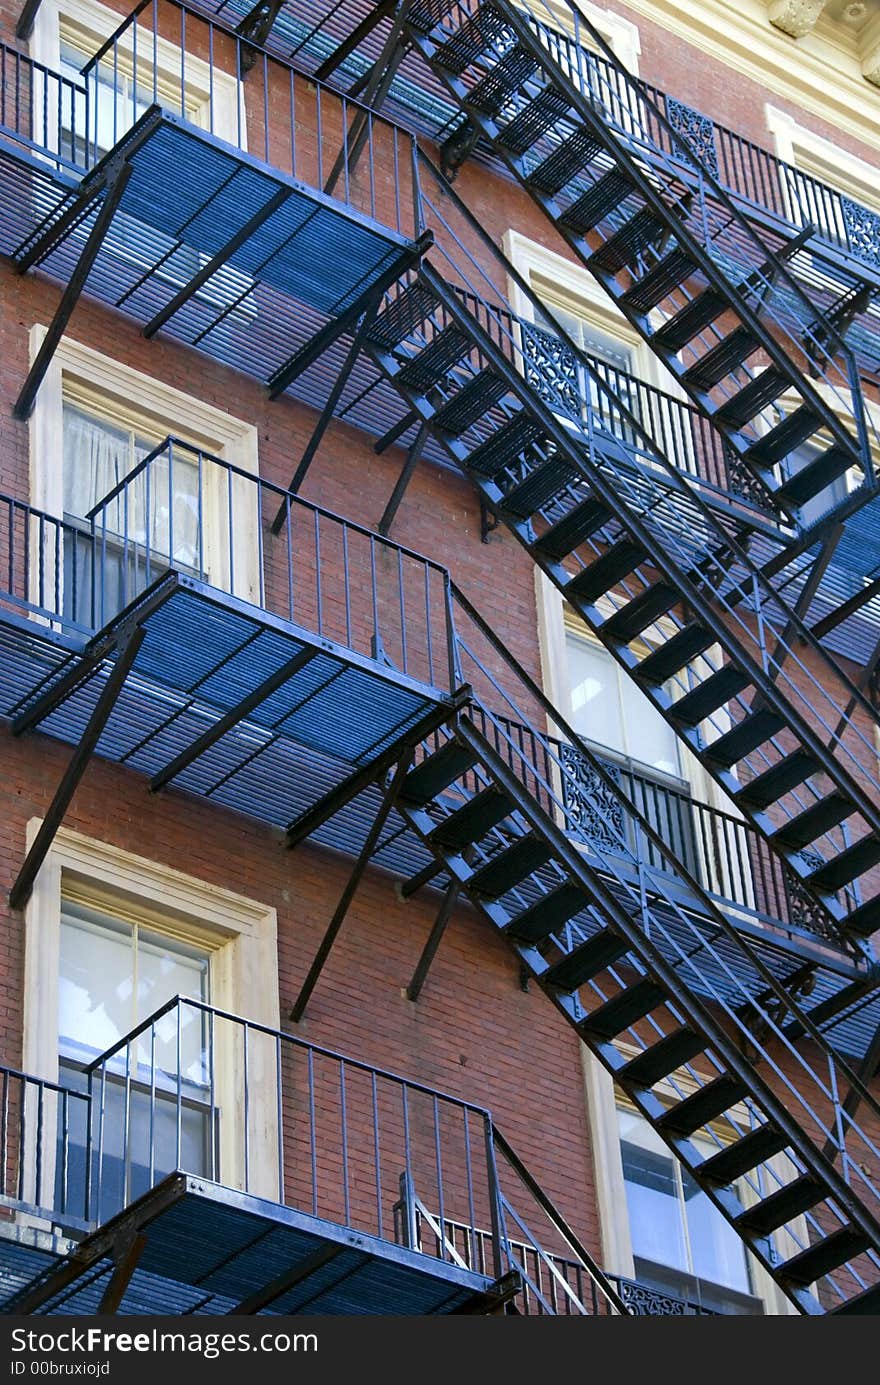 Iron Fire Escape Stairs in the Beacon Hill area of Boston